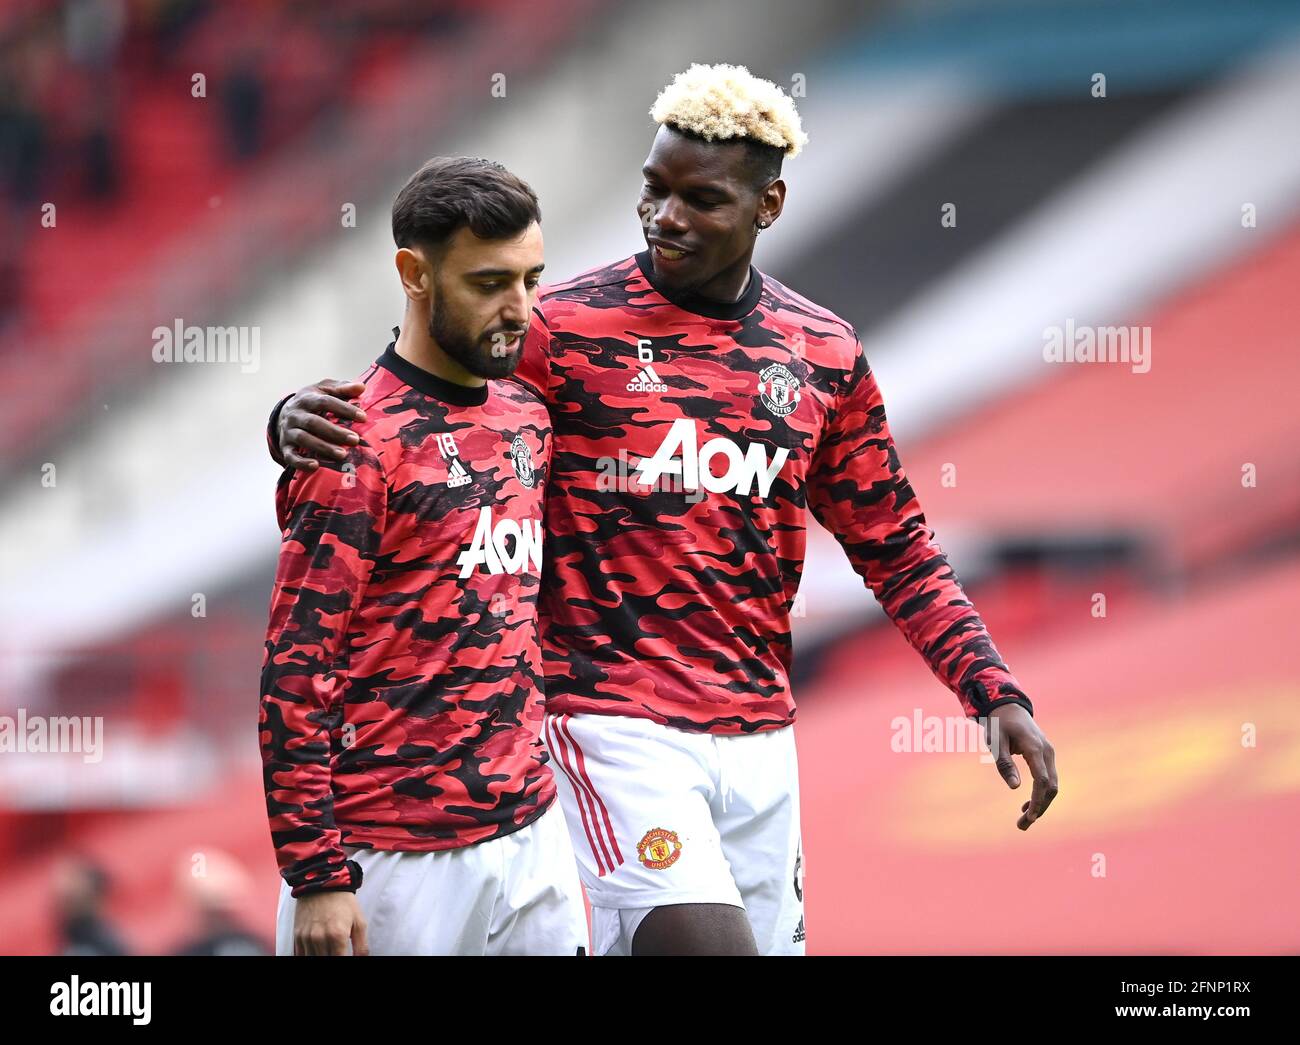 Manchester United's Paul Pogba (right) and Manchester United's Bruno Fernandes prior to the Premier League match at Old Trafford, Manchester. Picture date: Tuesday May 18, 2021. Stock Photo